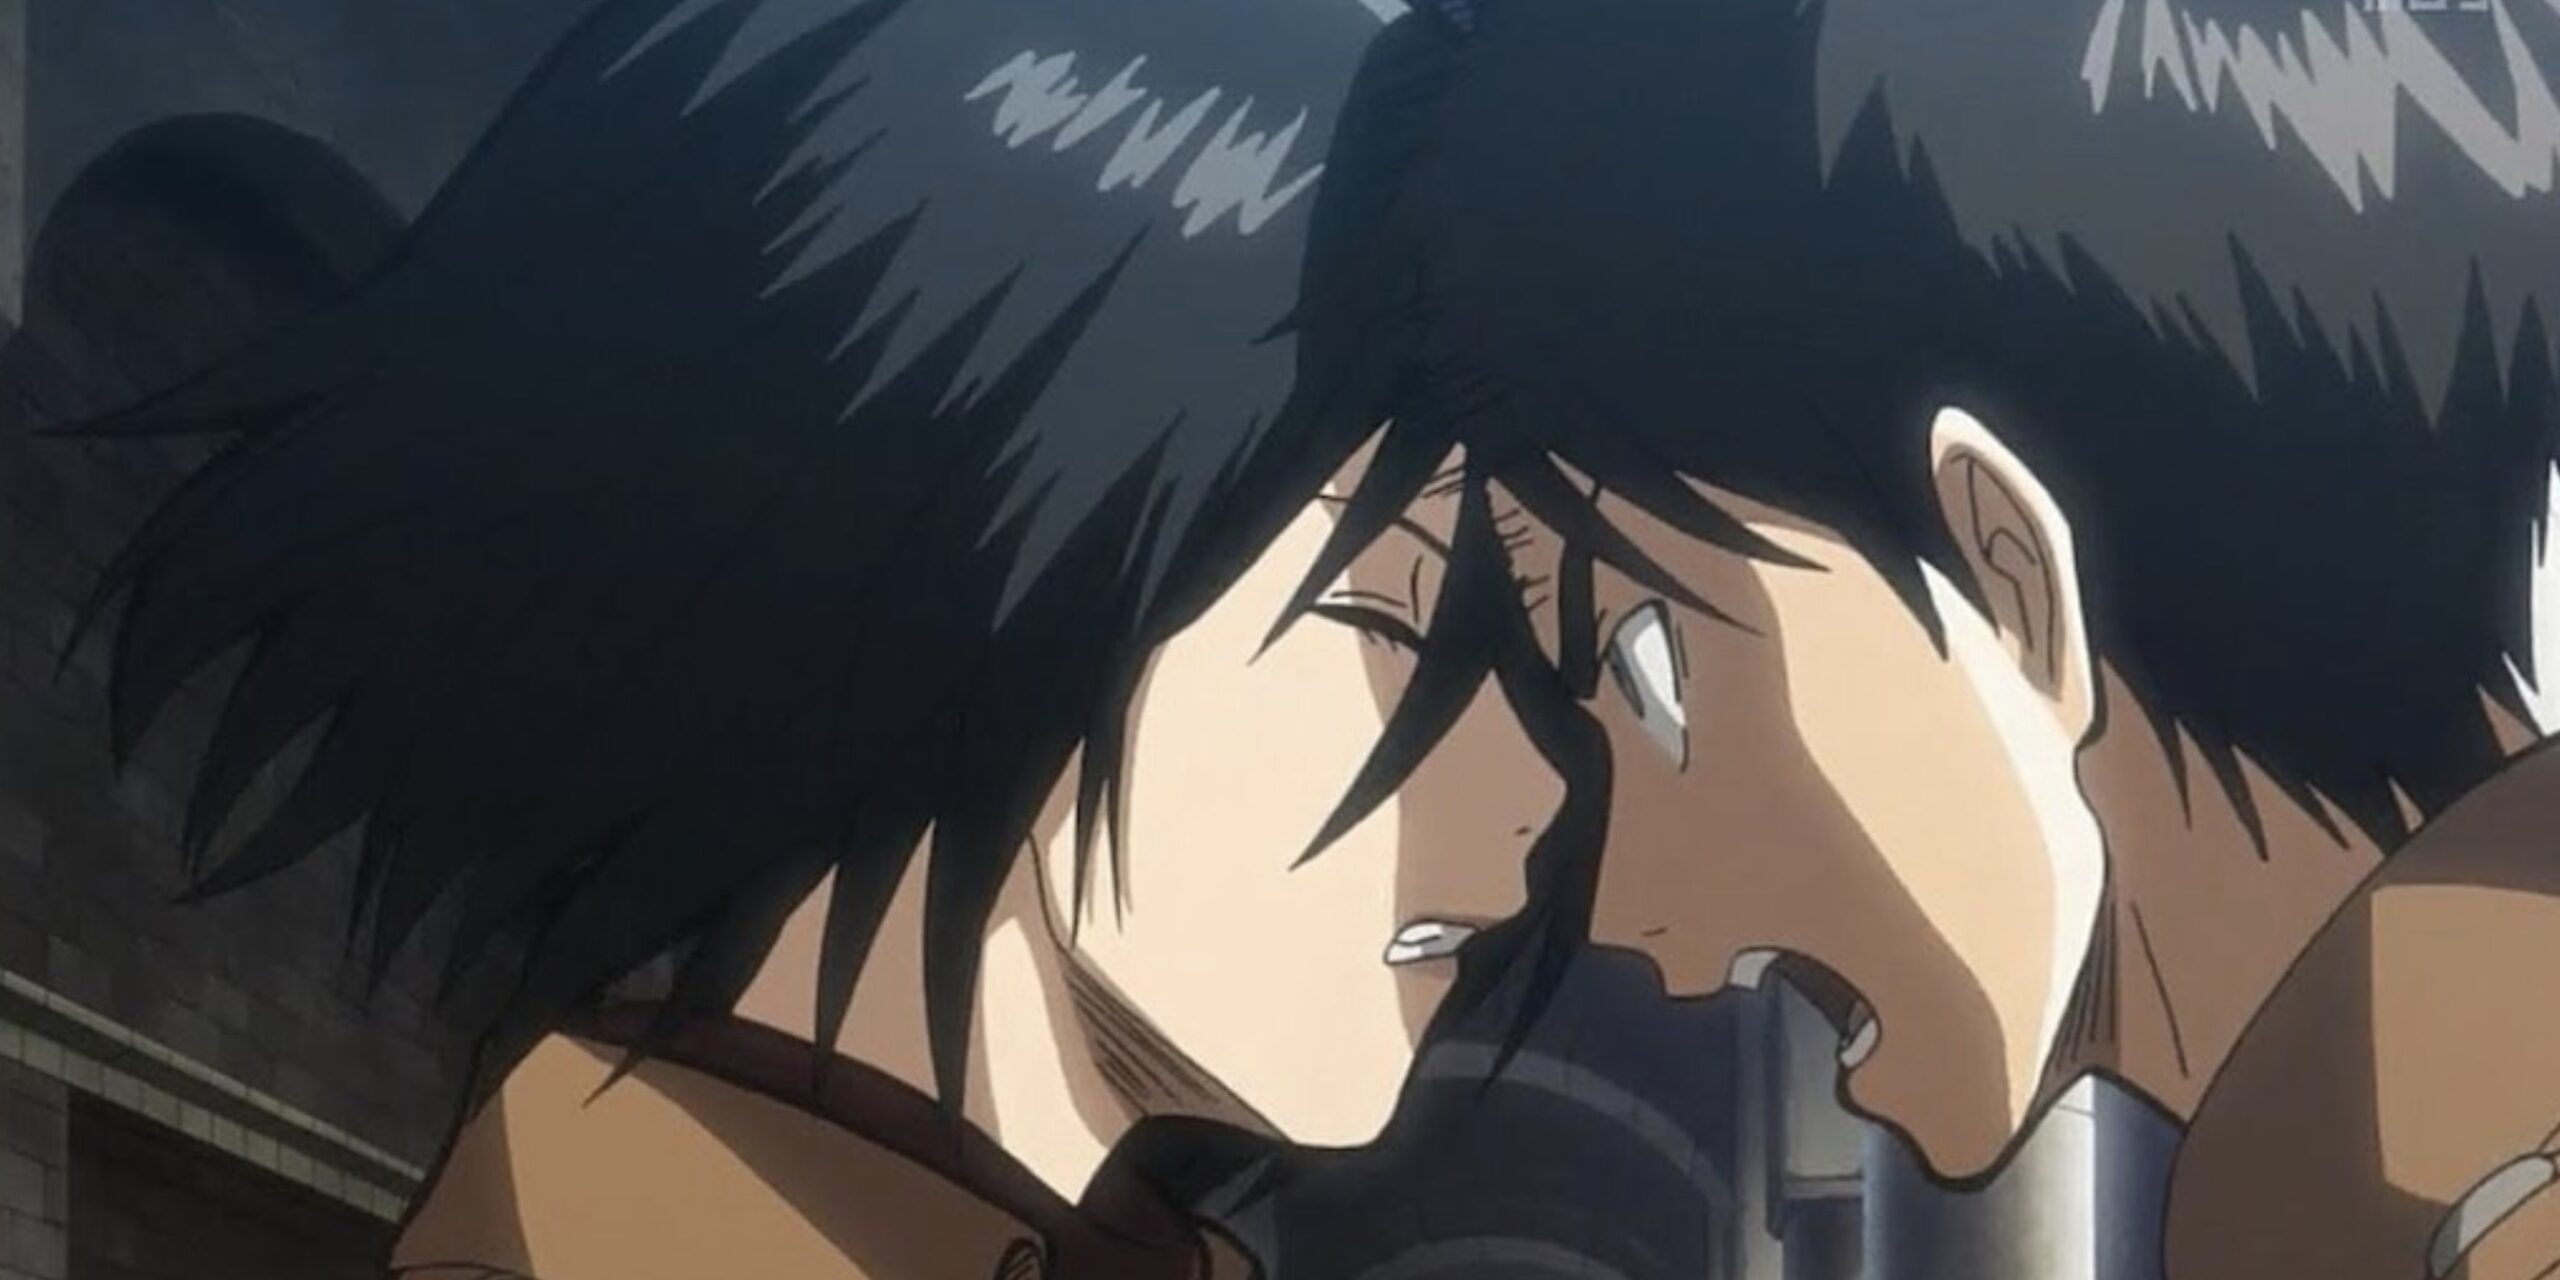 Do Eren And Mikasa Become A Couple By the Conclusion of Attack on Titan?